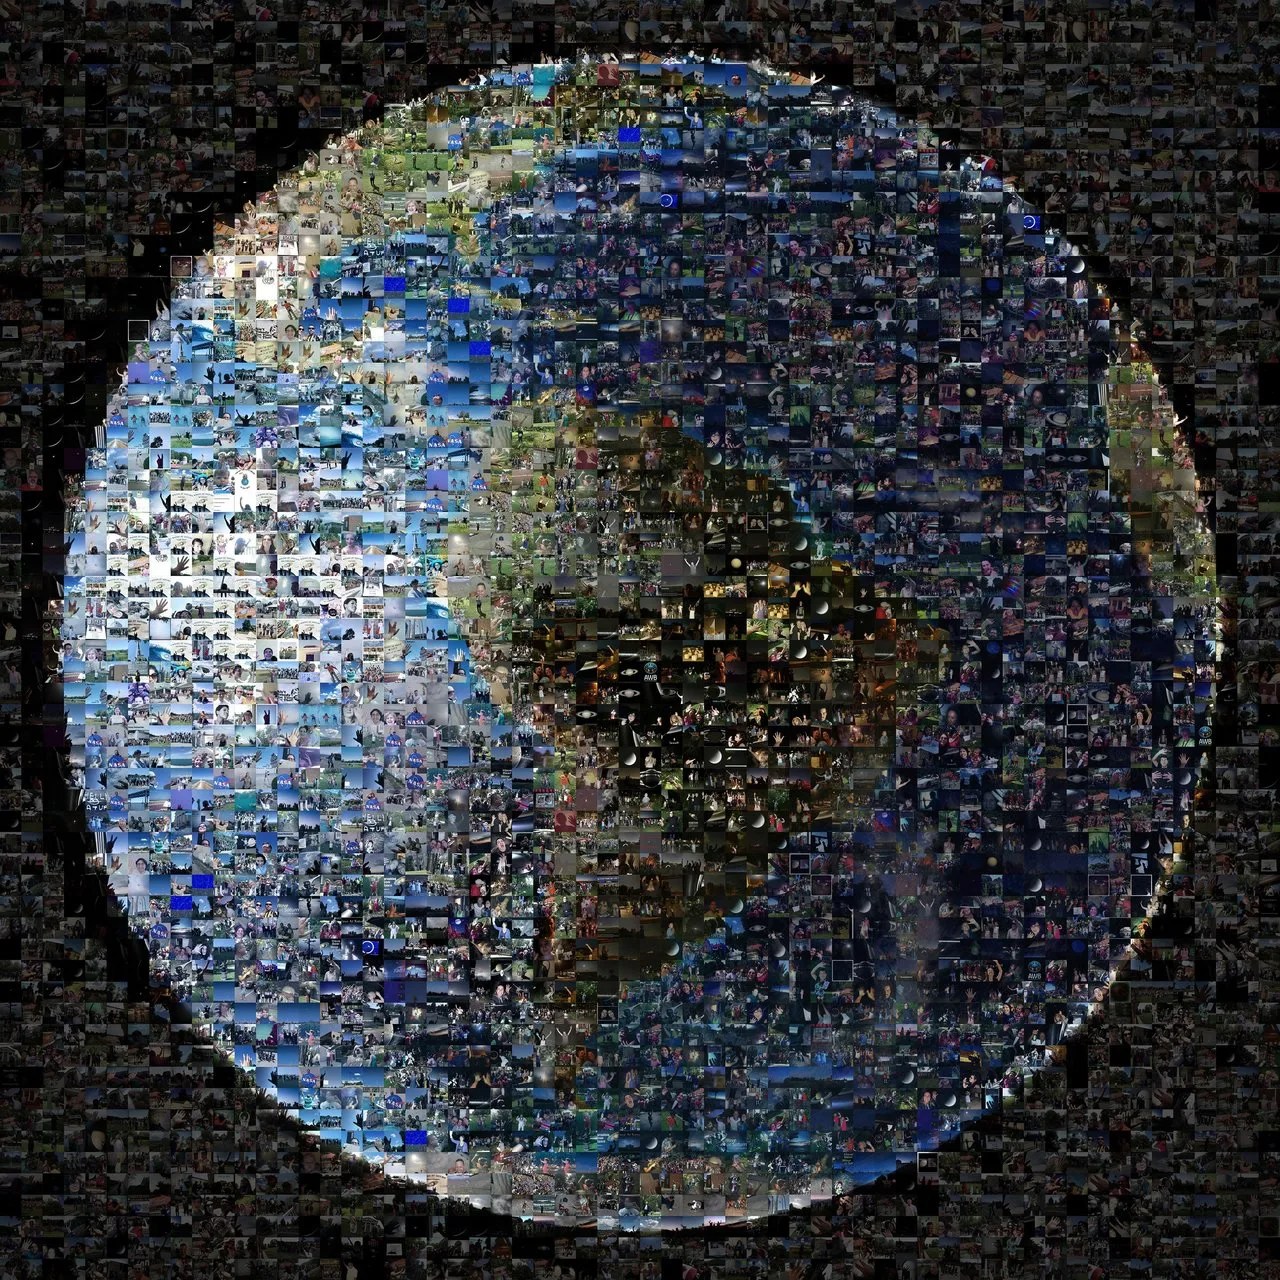 Composite view of Earth made of hundreds of smiling faces.